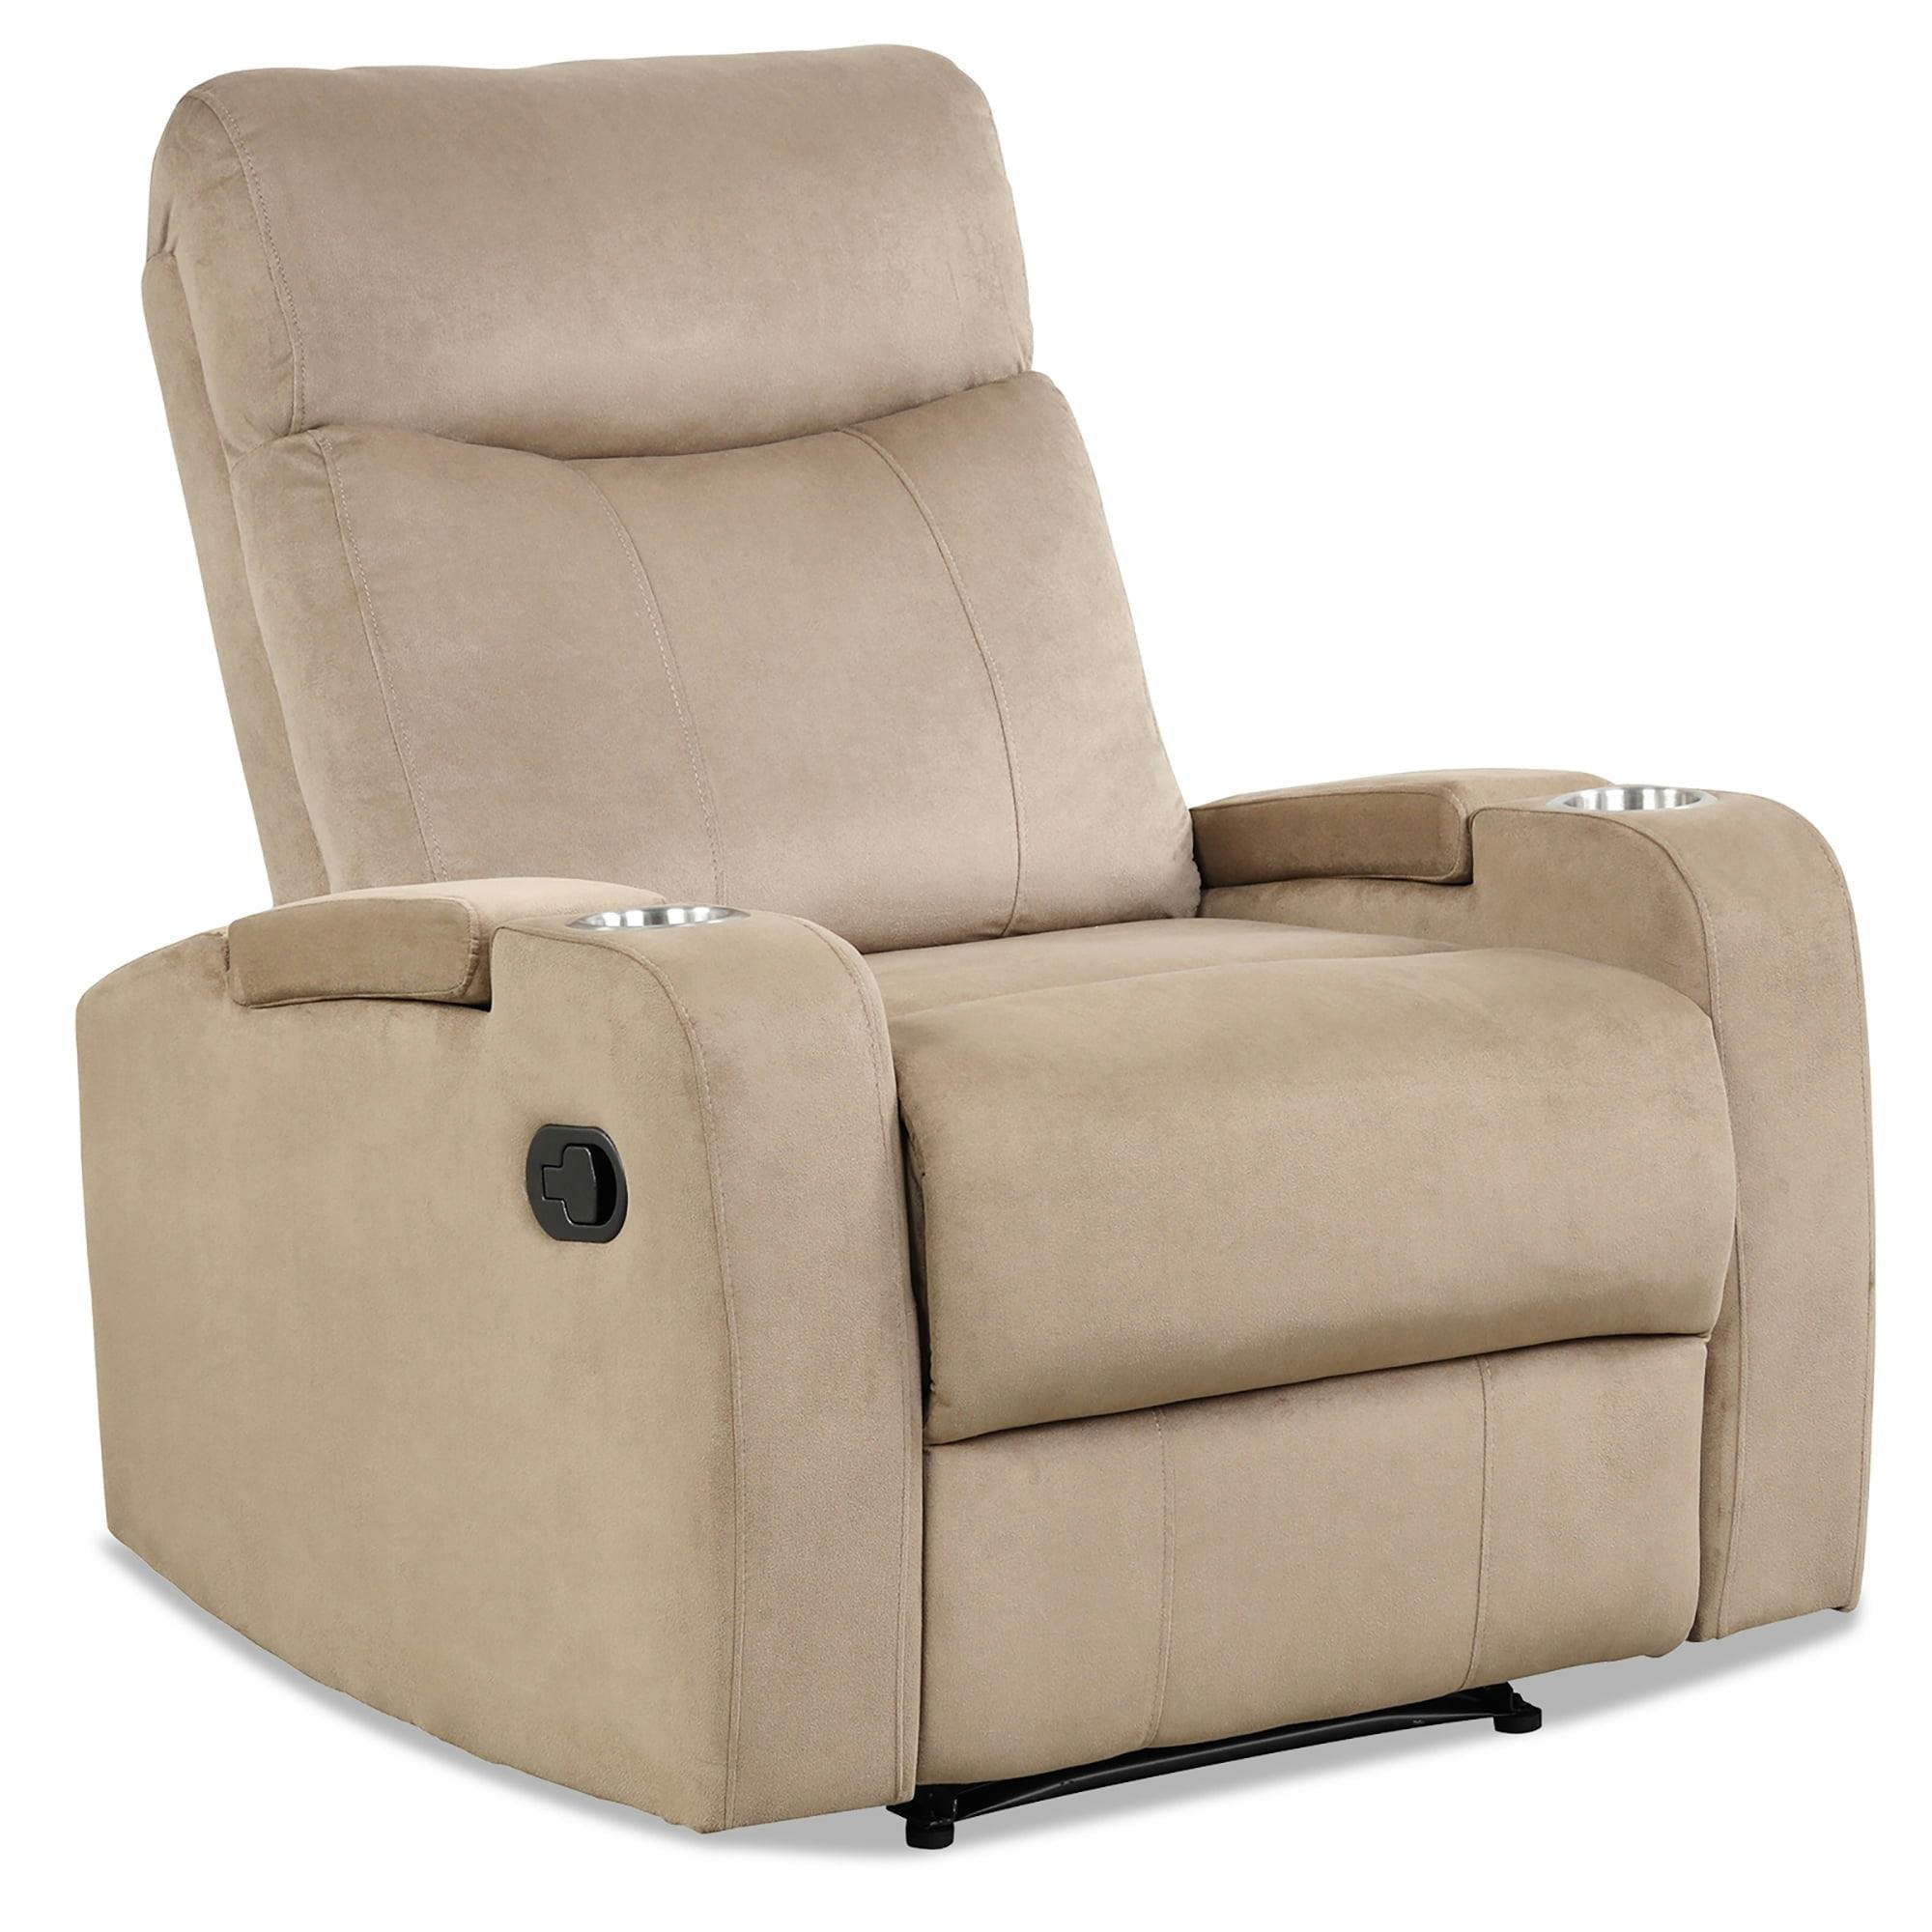 Ergonomic Brown Microfiber Recliner with Storage & Cup Holders